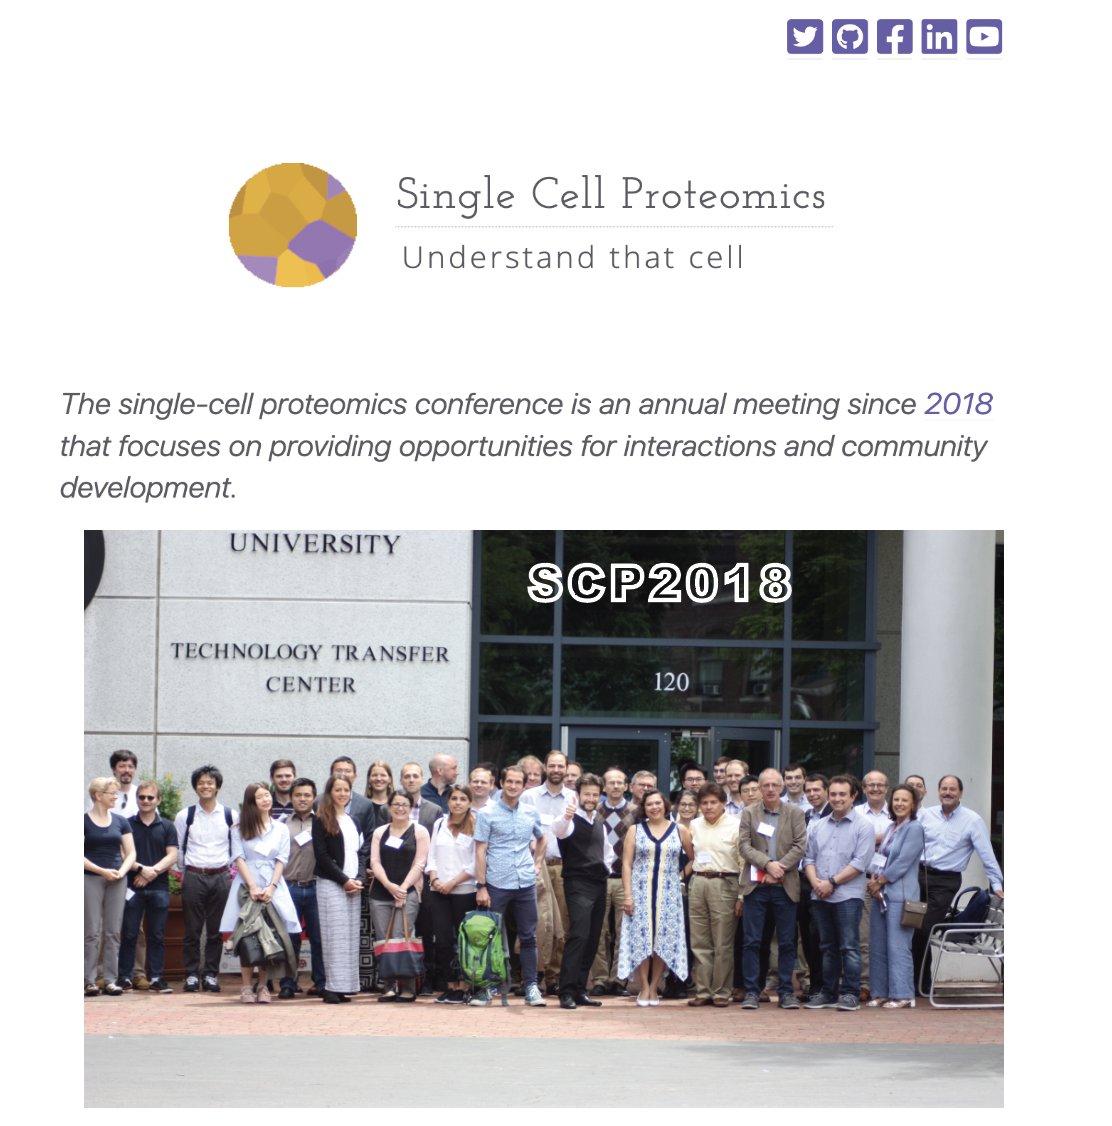 We first met in June 2018. Since then, every meeting has reflected the annual progress of our community. Based on the abstracts, 2024 will not disappoint. I can barely wait for my teams to share results from @slavovLab and @ParallelSqTech. single-cell.net